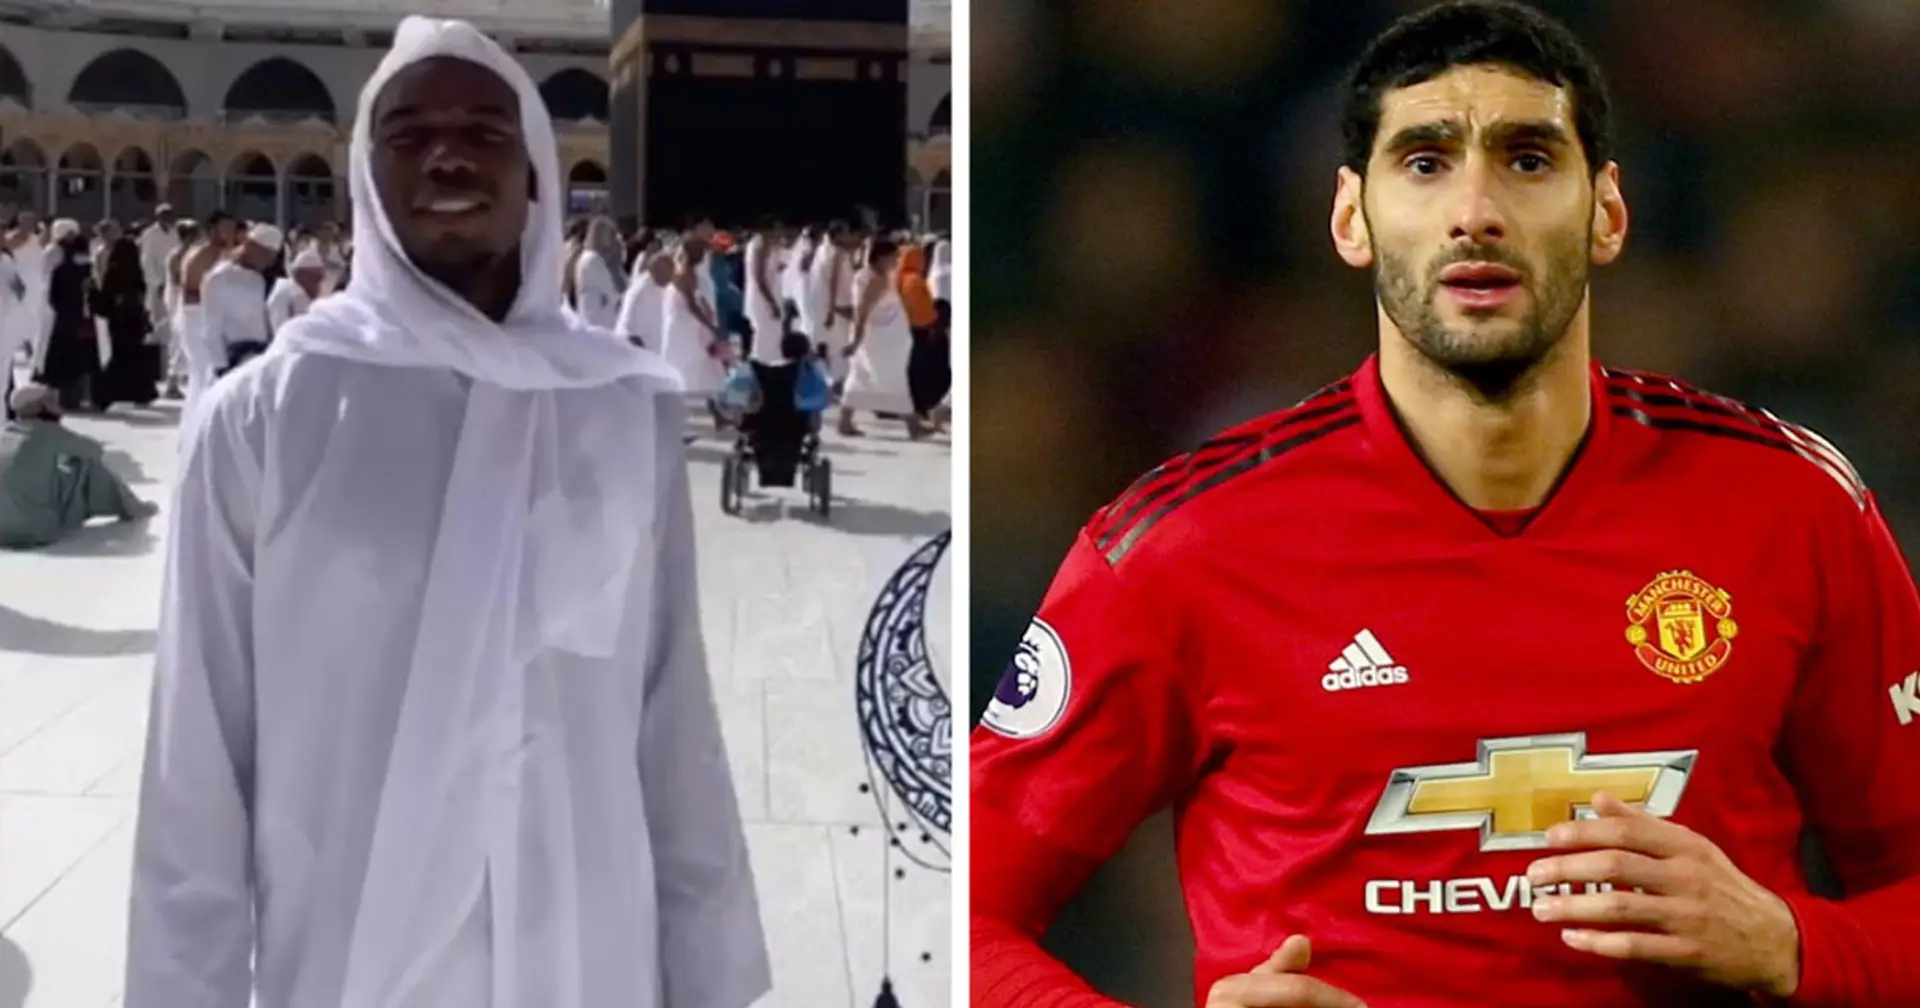 Eid Mubarak: 4 famous Muslim players to have played for United